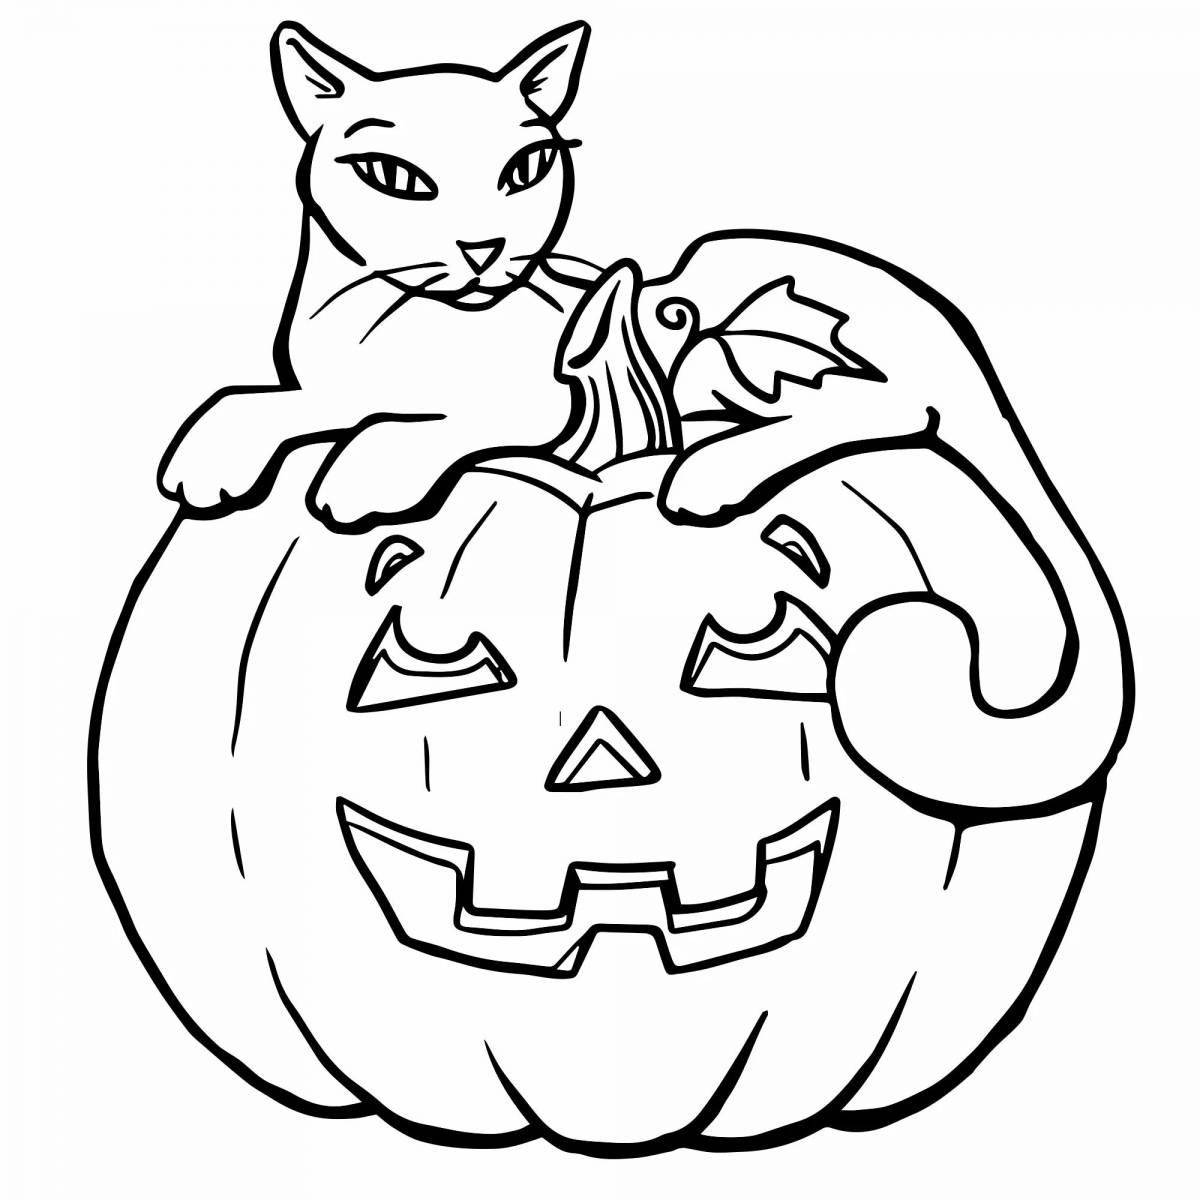 Ethereal halloween coloring book